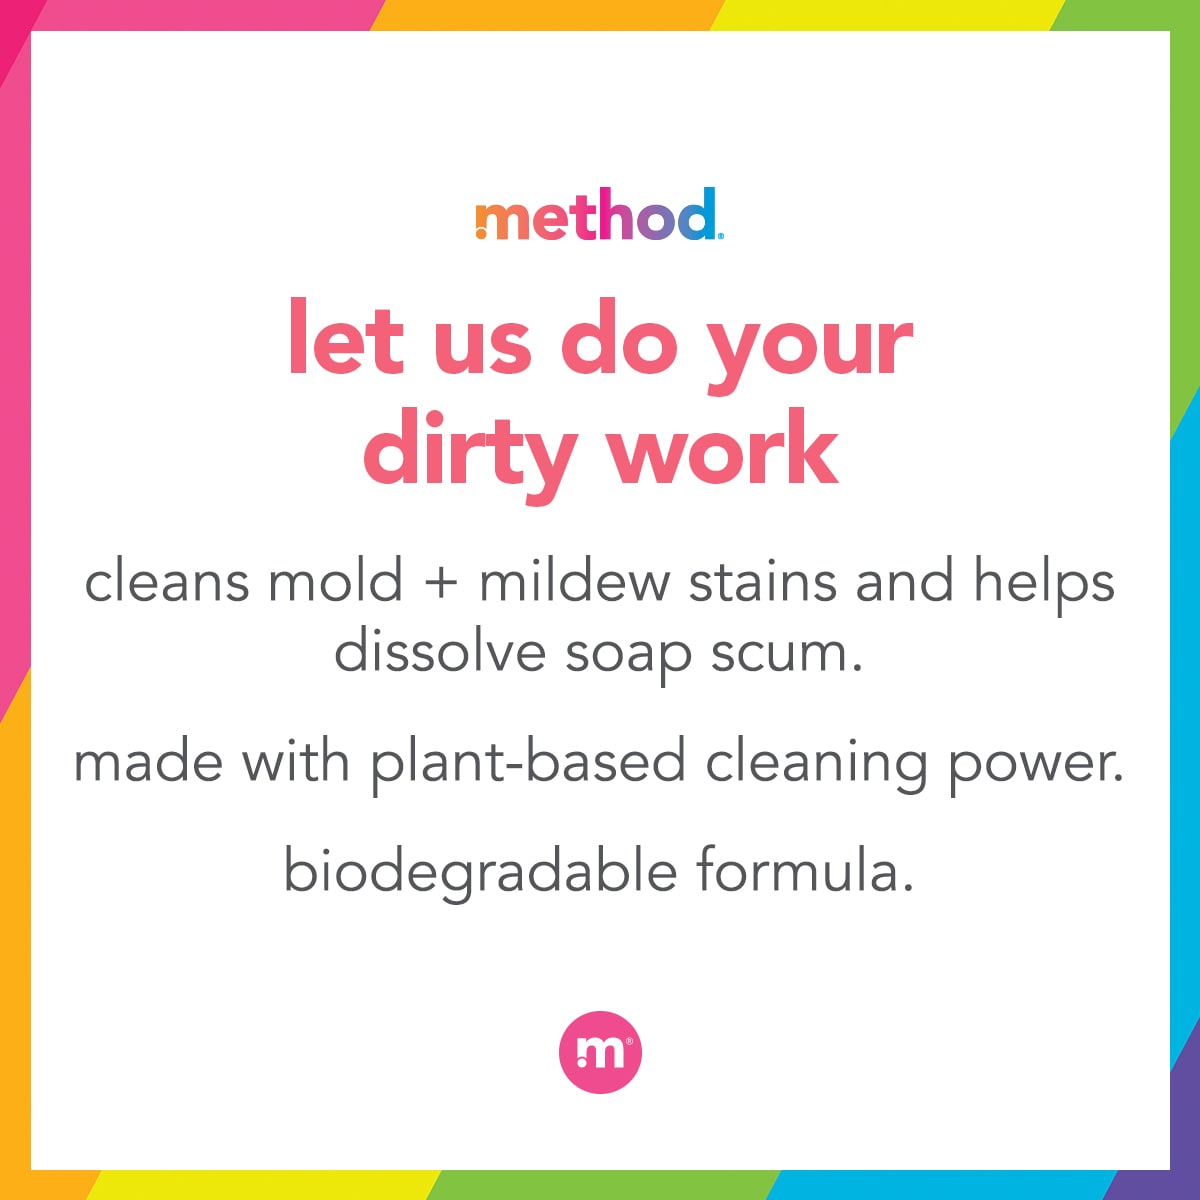 Method Eucalyptus Mint Cleaning Products Foaming Bathroom Cleaner Spray  Bottle - 28 fl oz